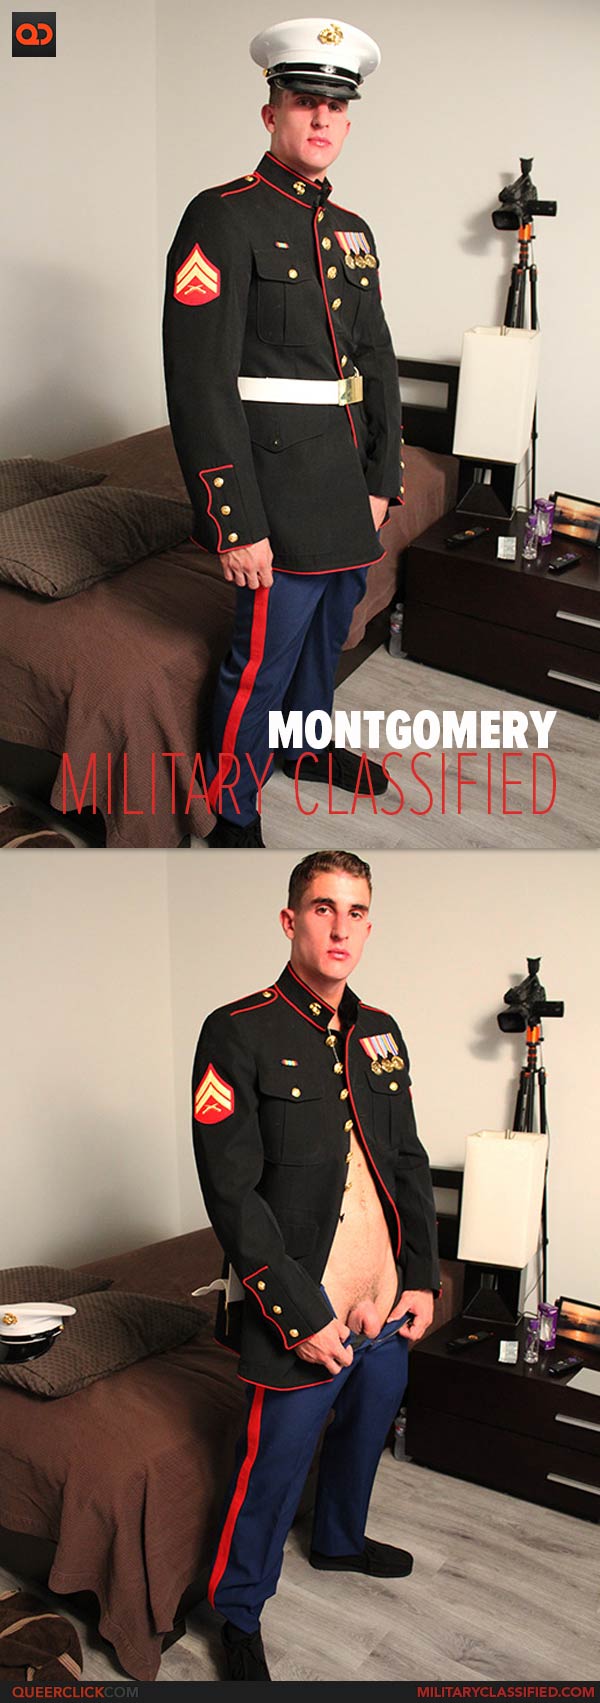 Military Classified: Montgommery